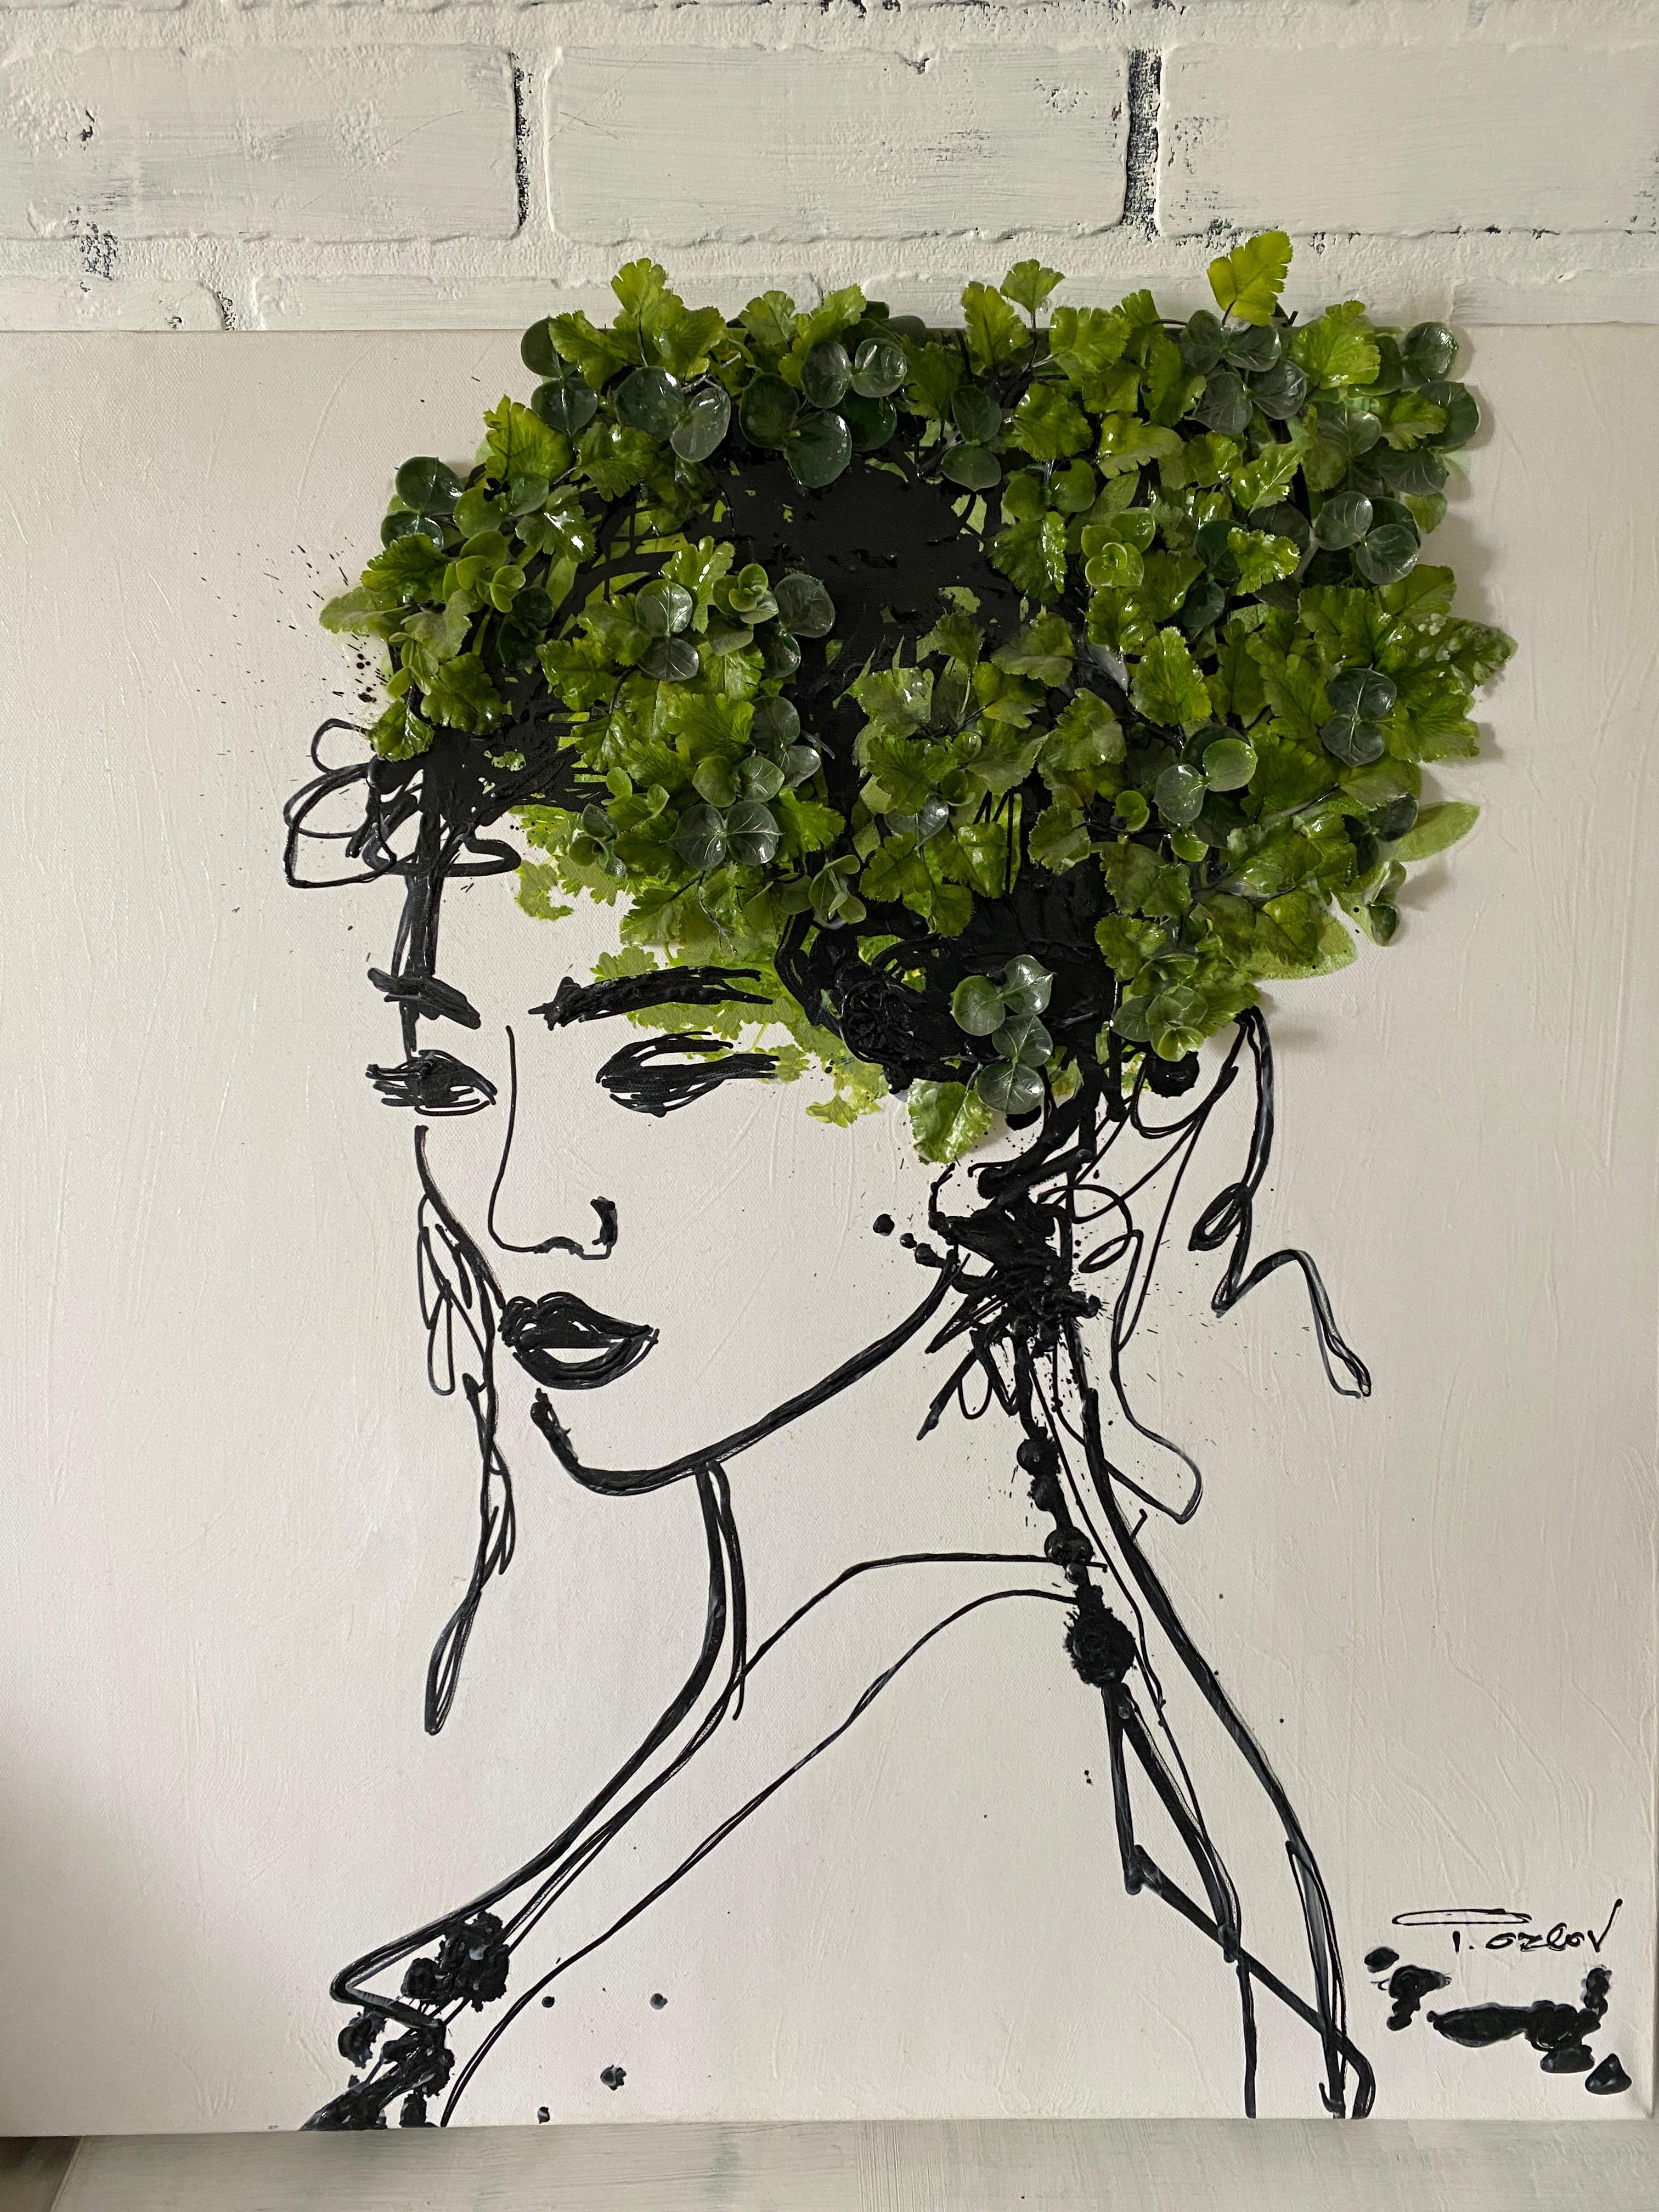 Beauty Spring Woman - Acrylic and 3D Painting on Canvas Biophilic Design 24x24